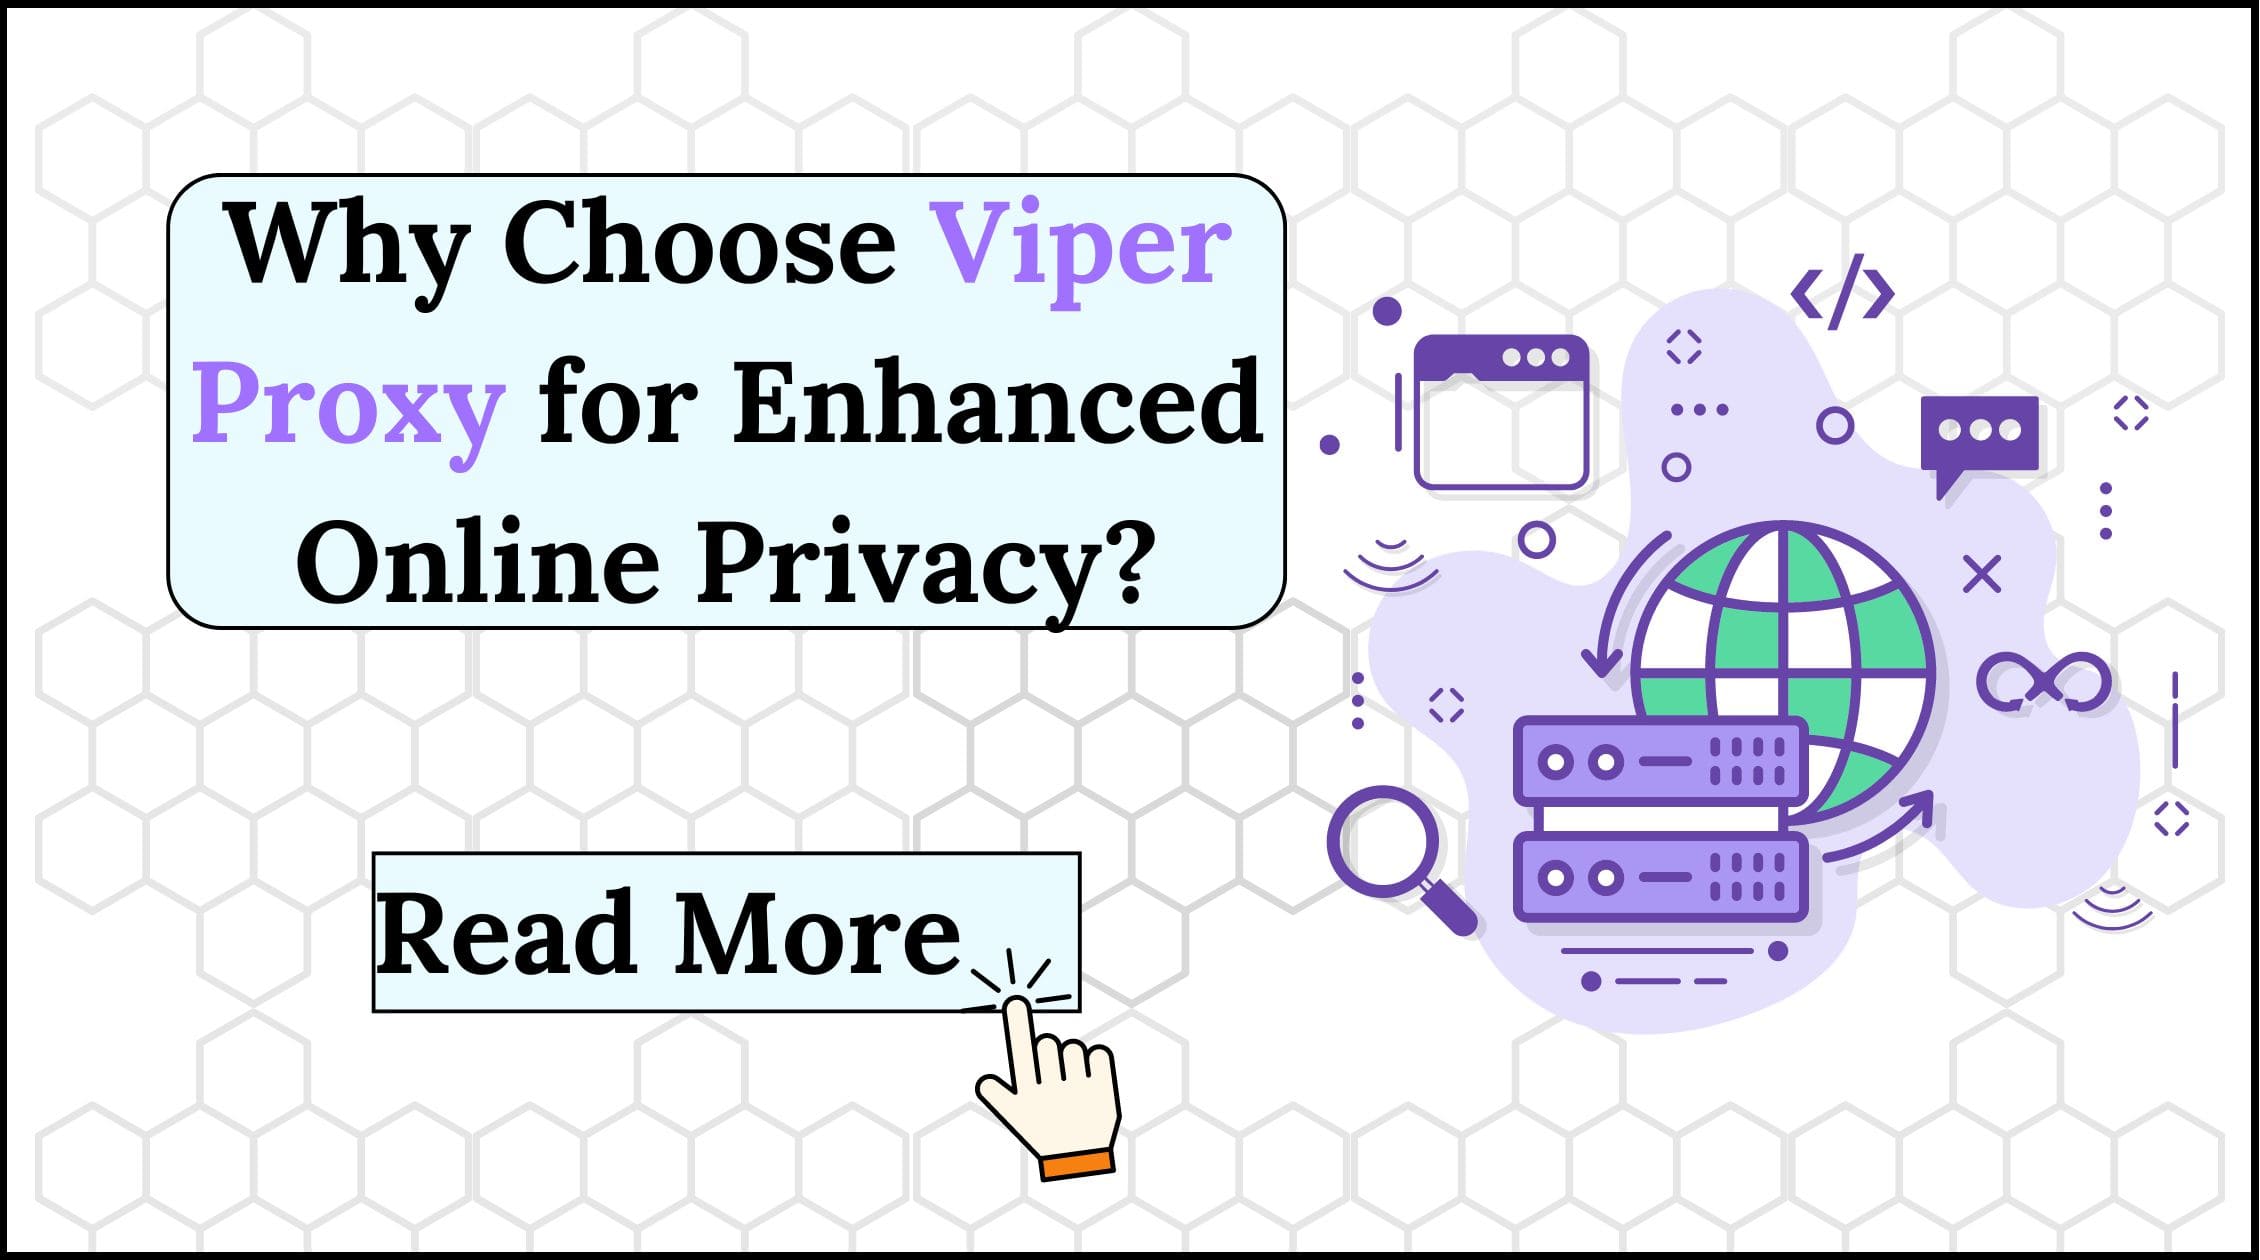 the importance of online privacy has surged, with many individuals seeking ways to safeguard their personal information. Viper Proxy is one of the best tools for this purpose.